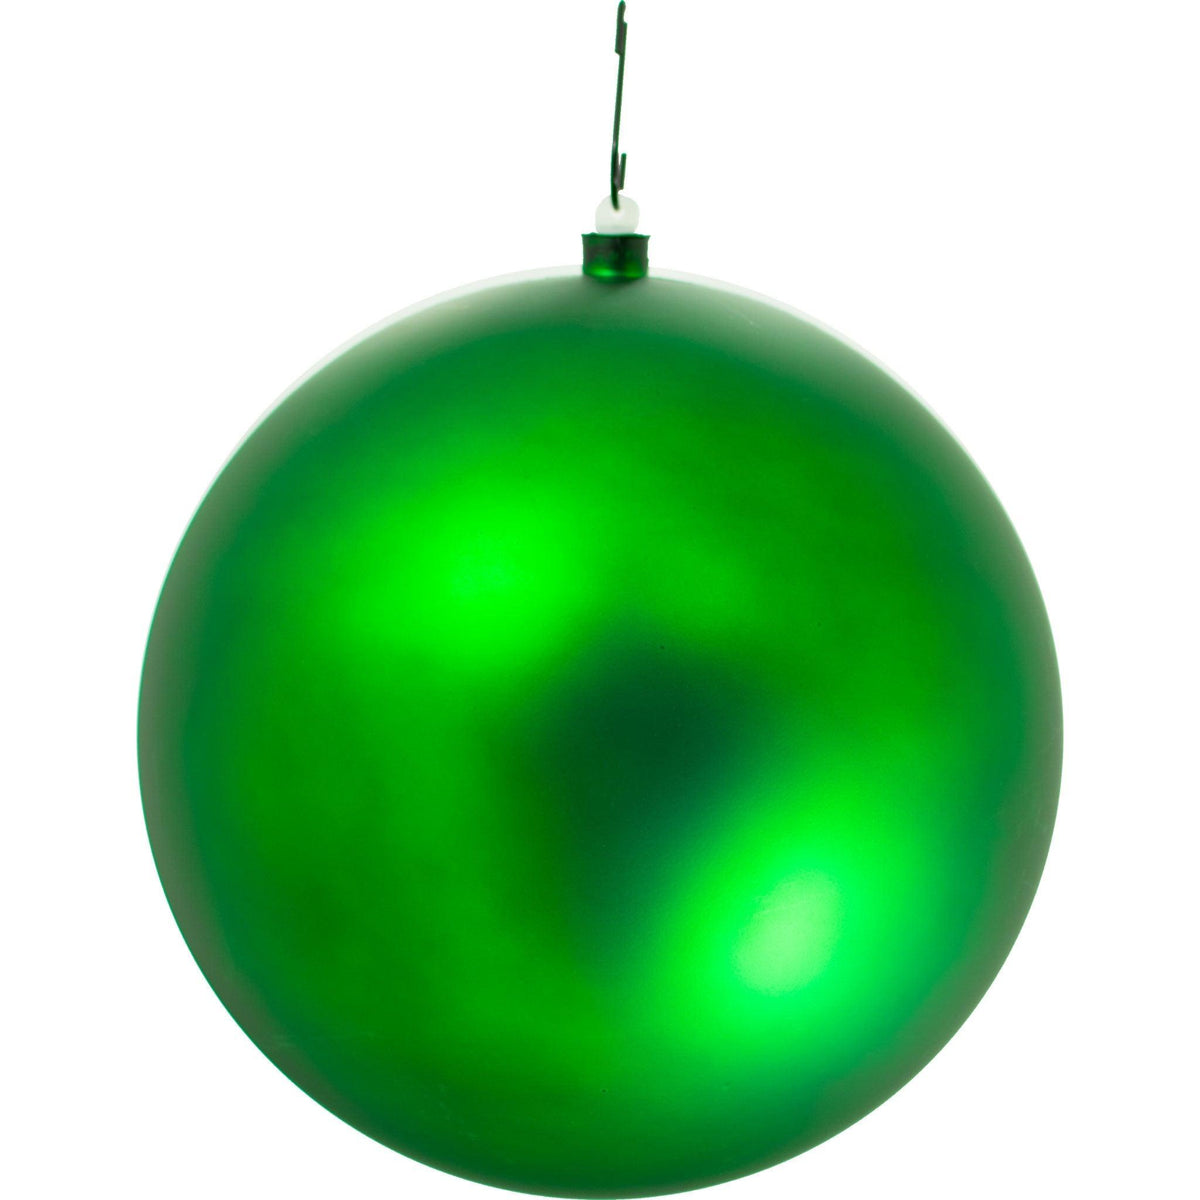 Lee Display offers brand new Shiny Matte Green Plastic Ball Ornaments at wholesale prices for affordable Christmas Tree Hanging and Holiday Decorating on sale at leedisplay.com